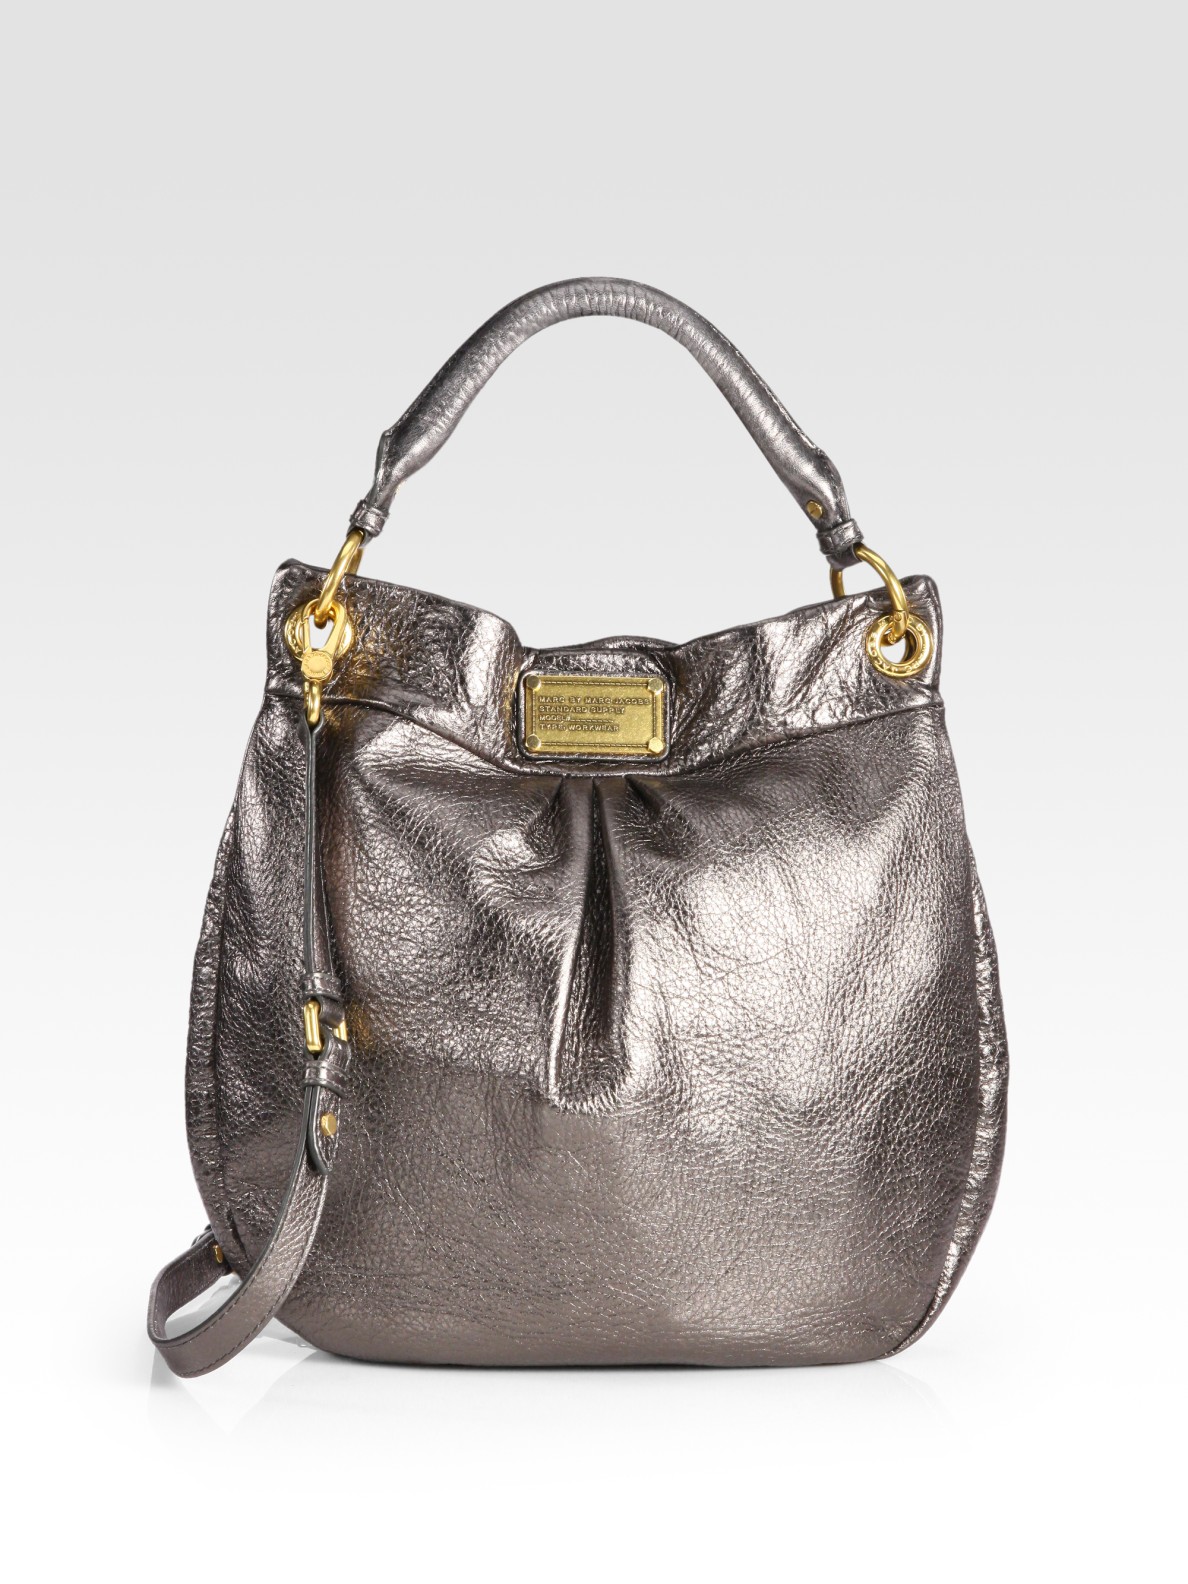 Lyst - Marc By Marc Jacobs Classic Q Metallic Leather Hillier Hobo Bag in Metallic